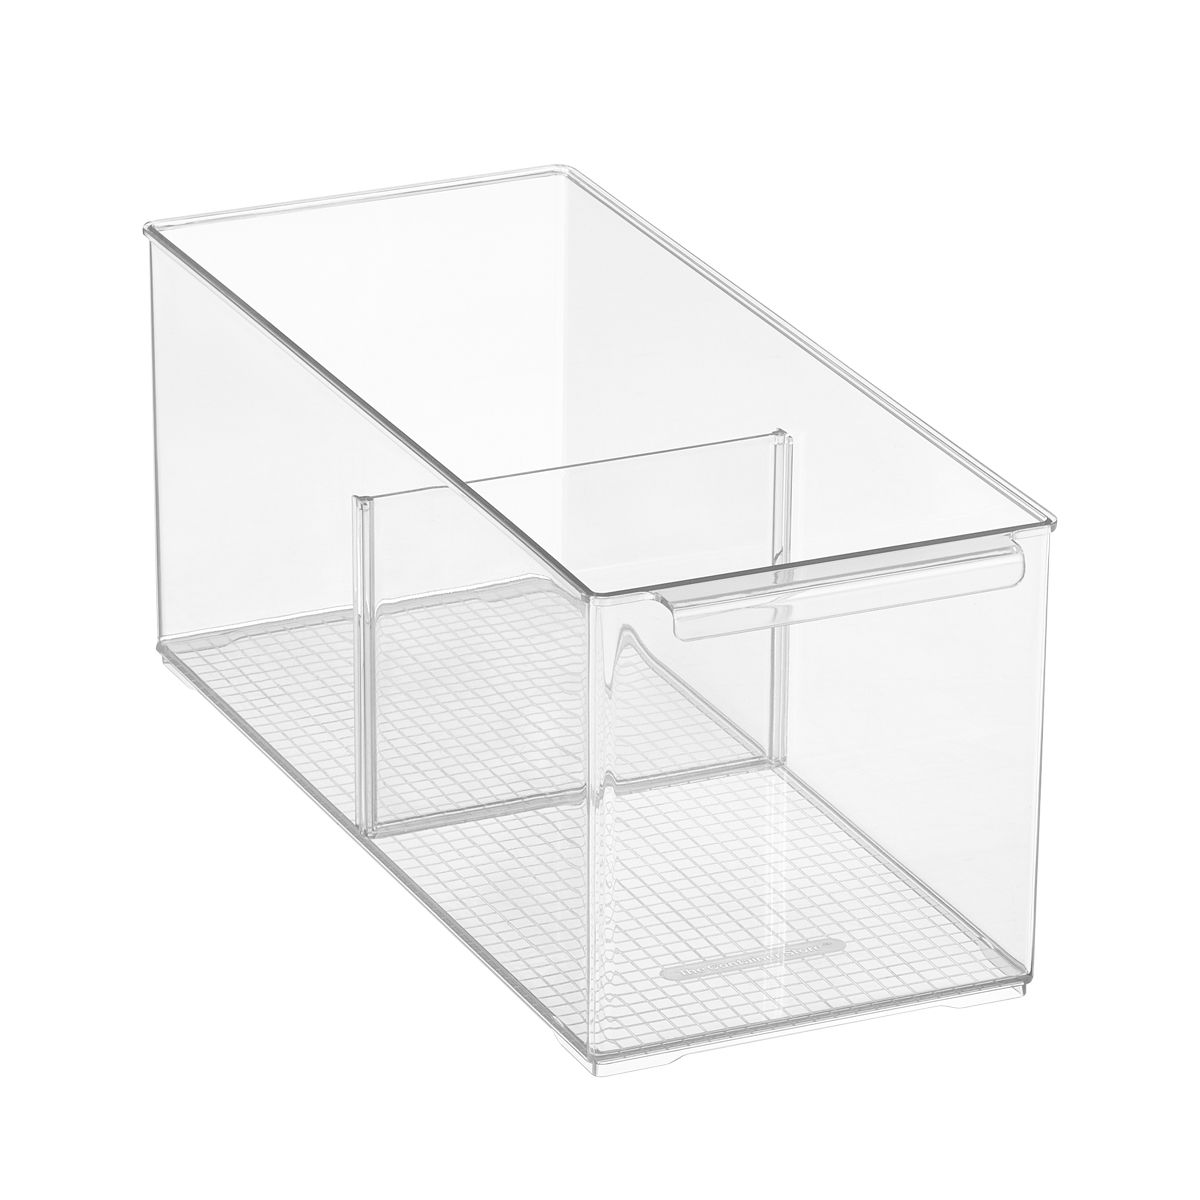 Everything Organizer Medium Shelf Depth Pantry Bin w/ Divider ClearSKU:100871674.84 Reviews | The Container Store